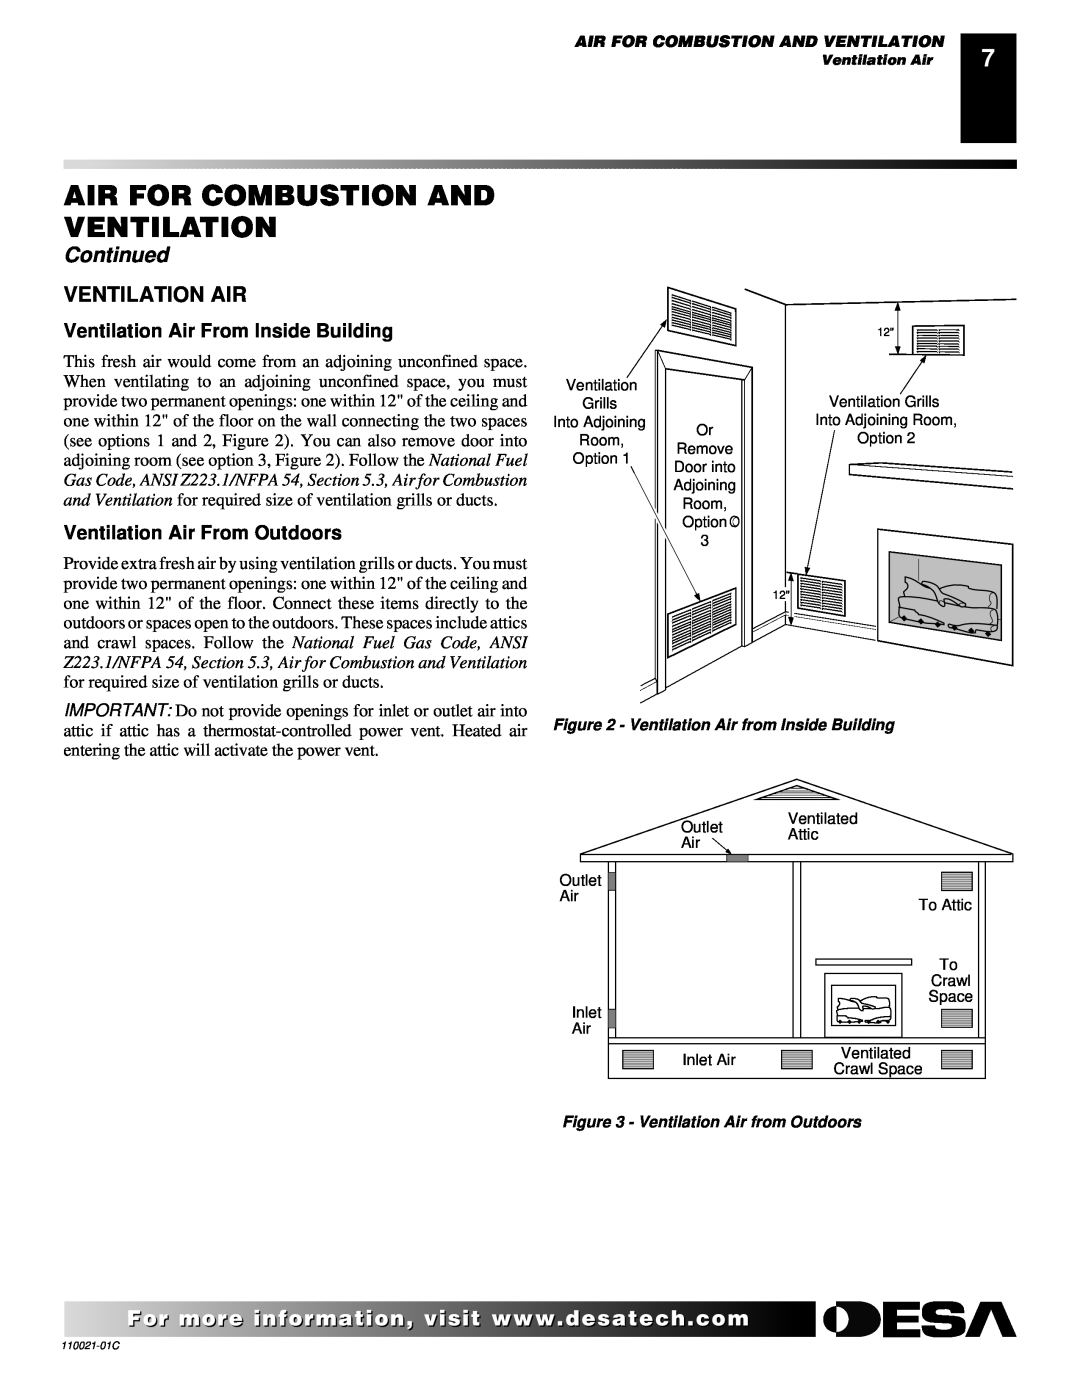 Desa CSG3924PR, RL24NR, CTB3924NT Air For Combustion And Ventilation, Continued, Ventilation Air From Inside Building 